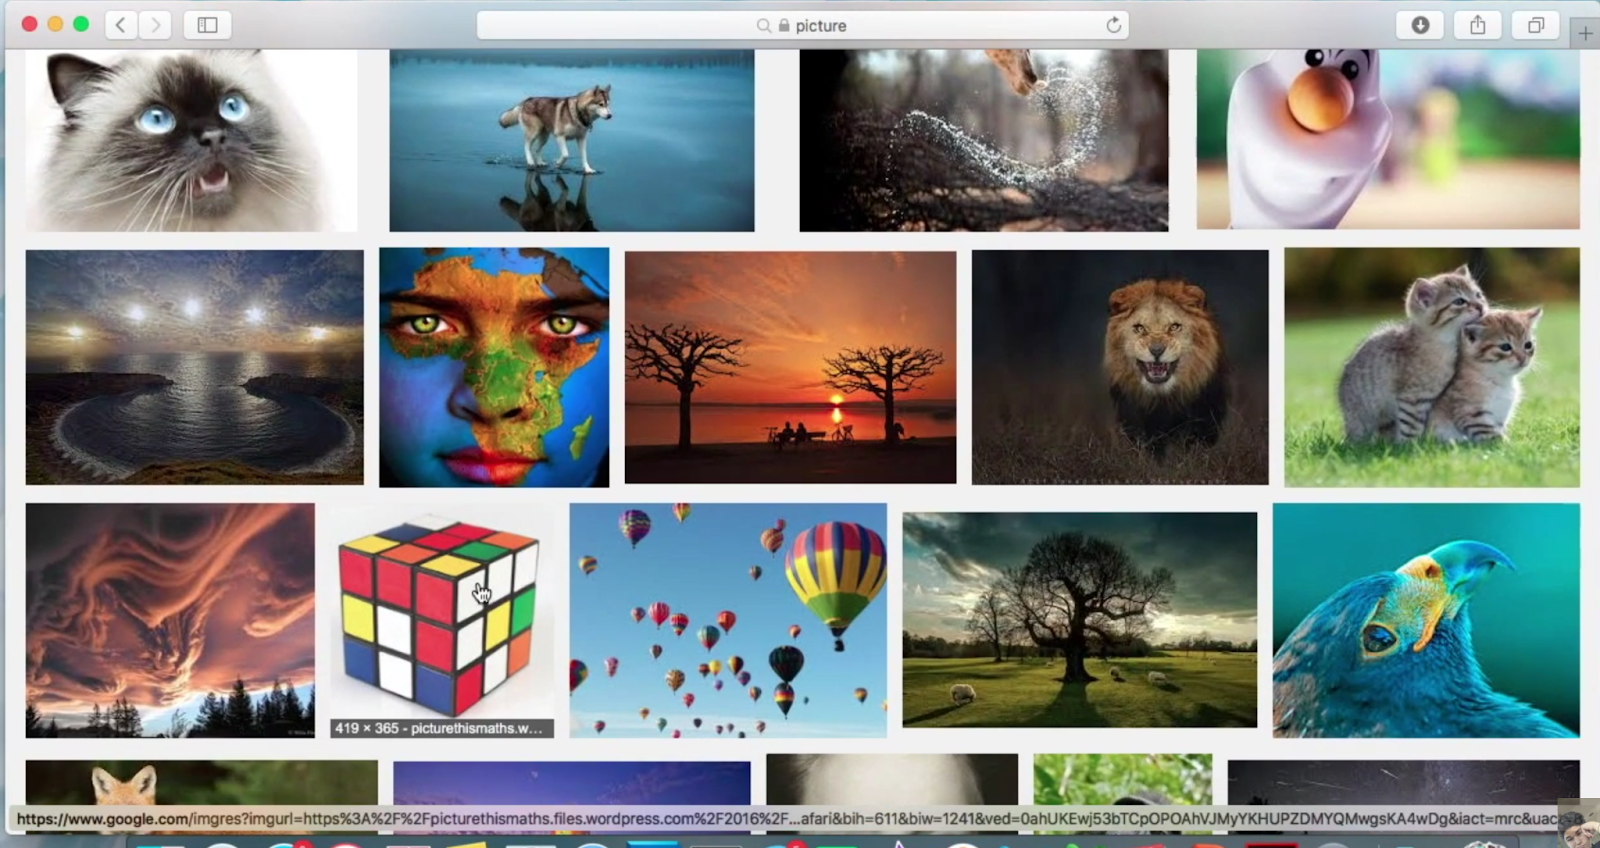 How to save image on macbook air